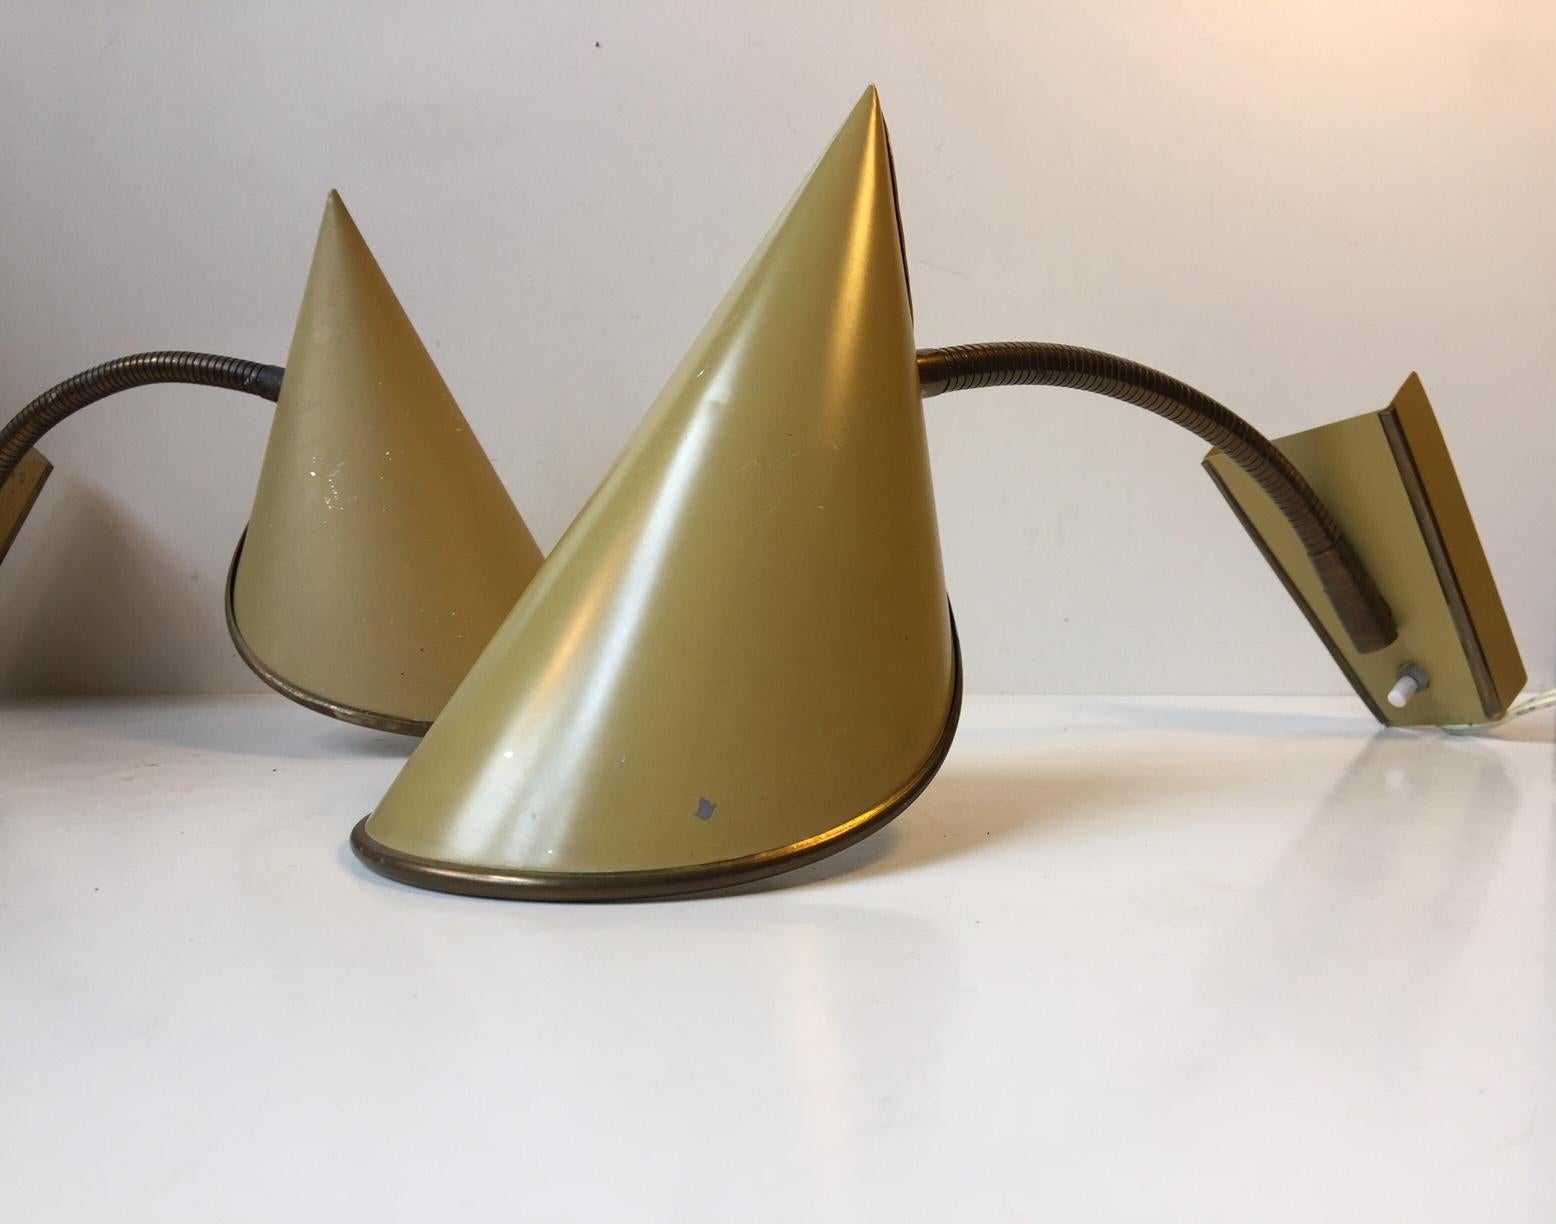 This pair of adjustable wall lights was manufactured and designed by Fog & Mørup in Denmark during the 1950s. The set features folded and pointy pastel yellow shades and a flexible fully adjustable brass goose-neck. The style of these lights was